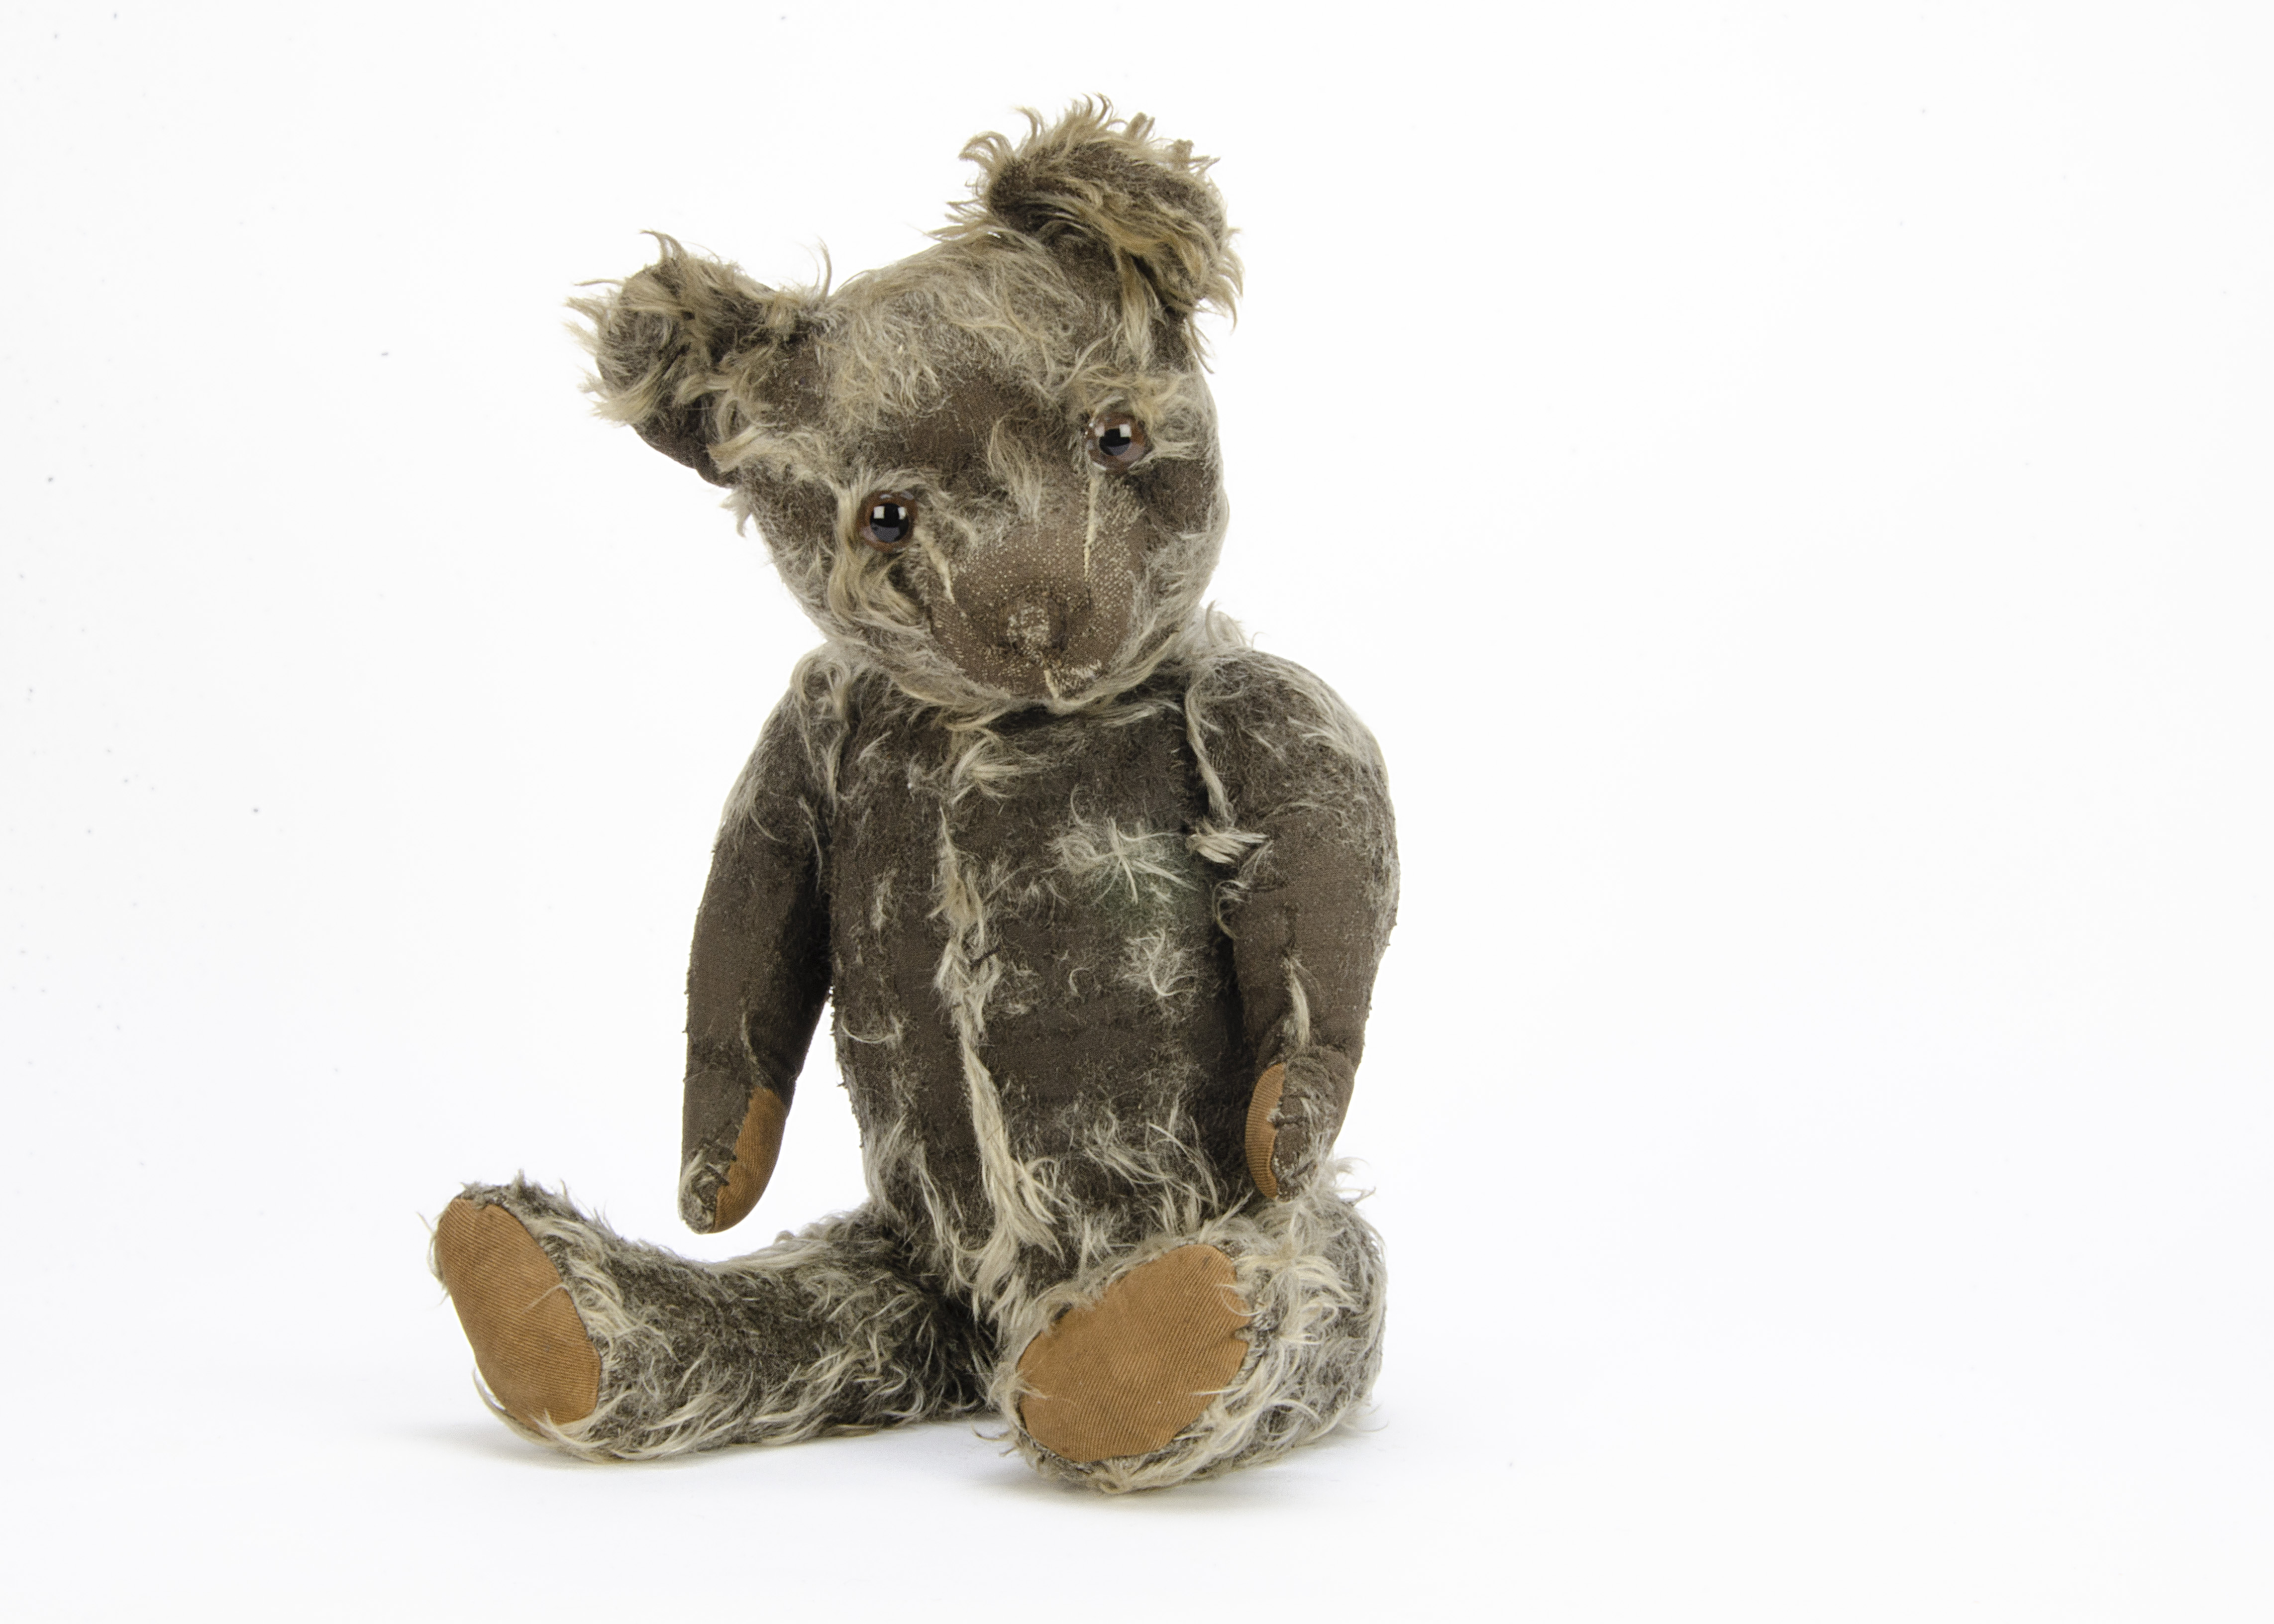 Mr T T a rare British black and grey teddy bear 1920s, possibly Teddy Toy Company with an - Image 2 of 2